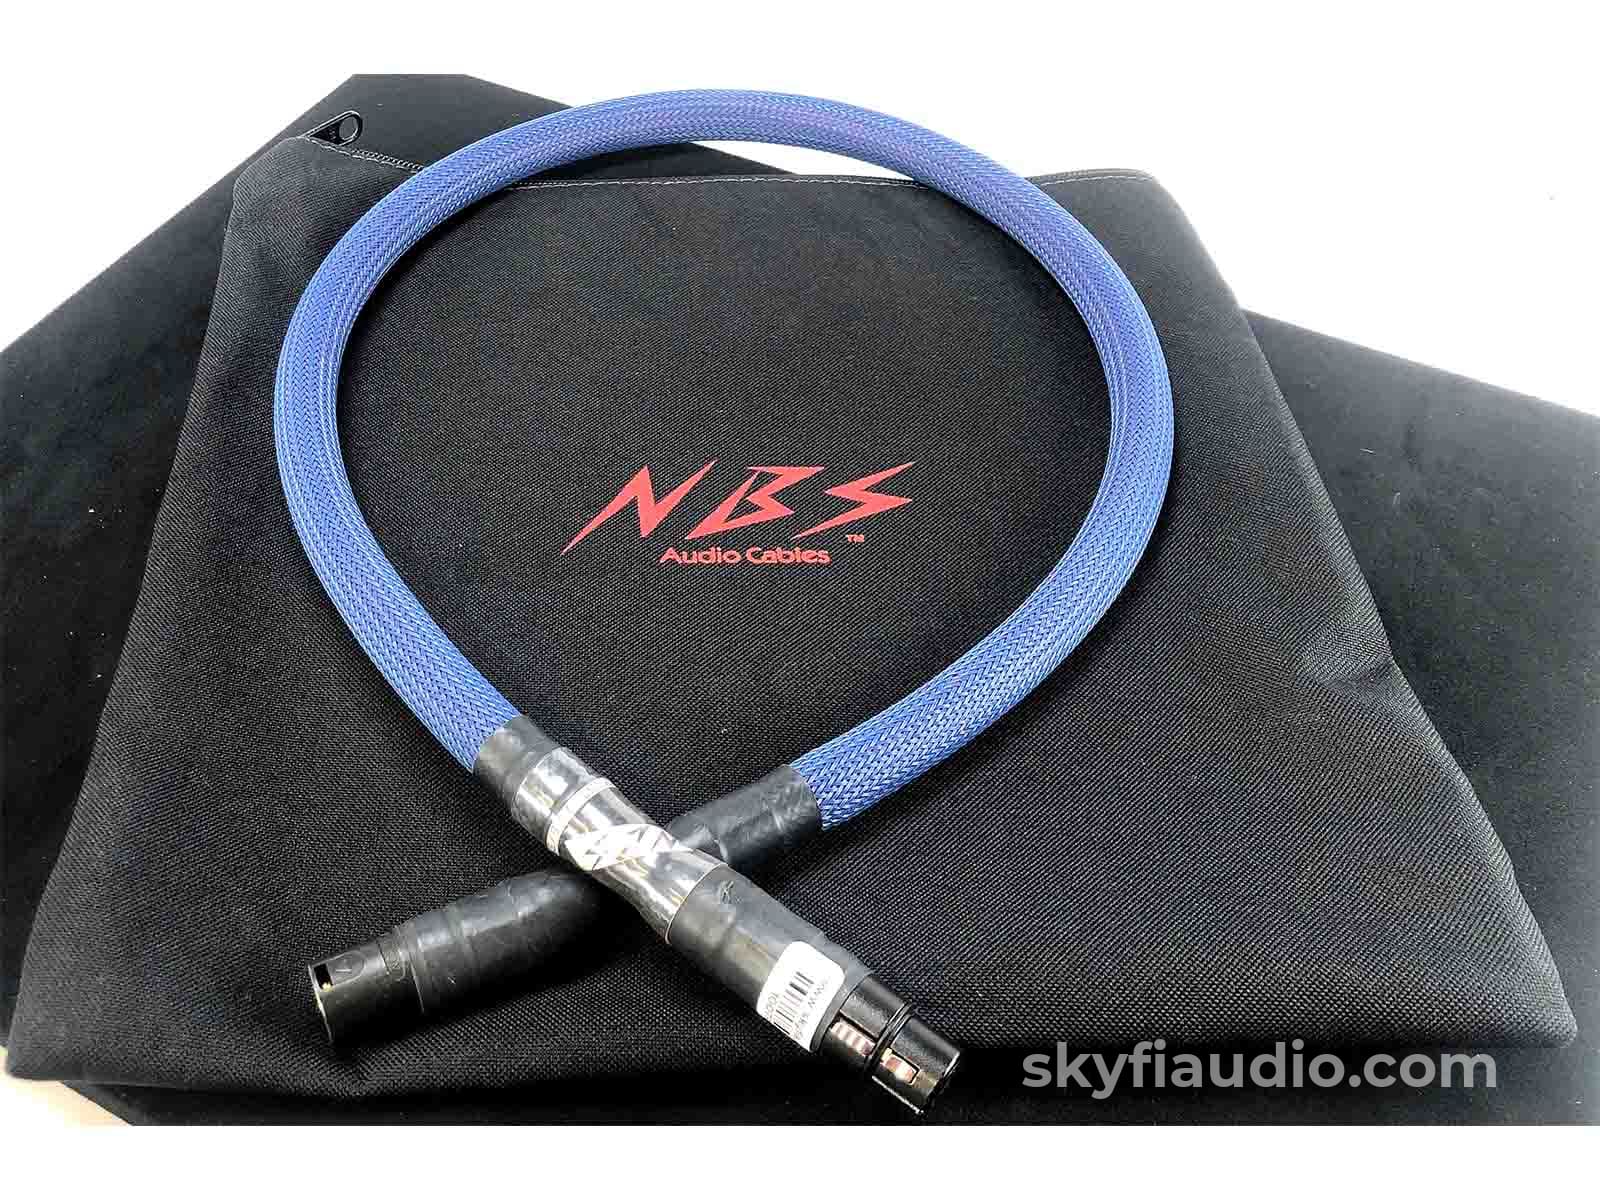 Nbs - Statement Aes/Ebu Digital Interconnect 1M Cables